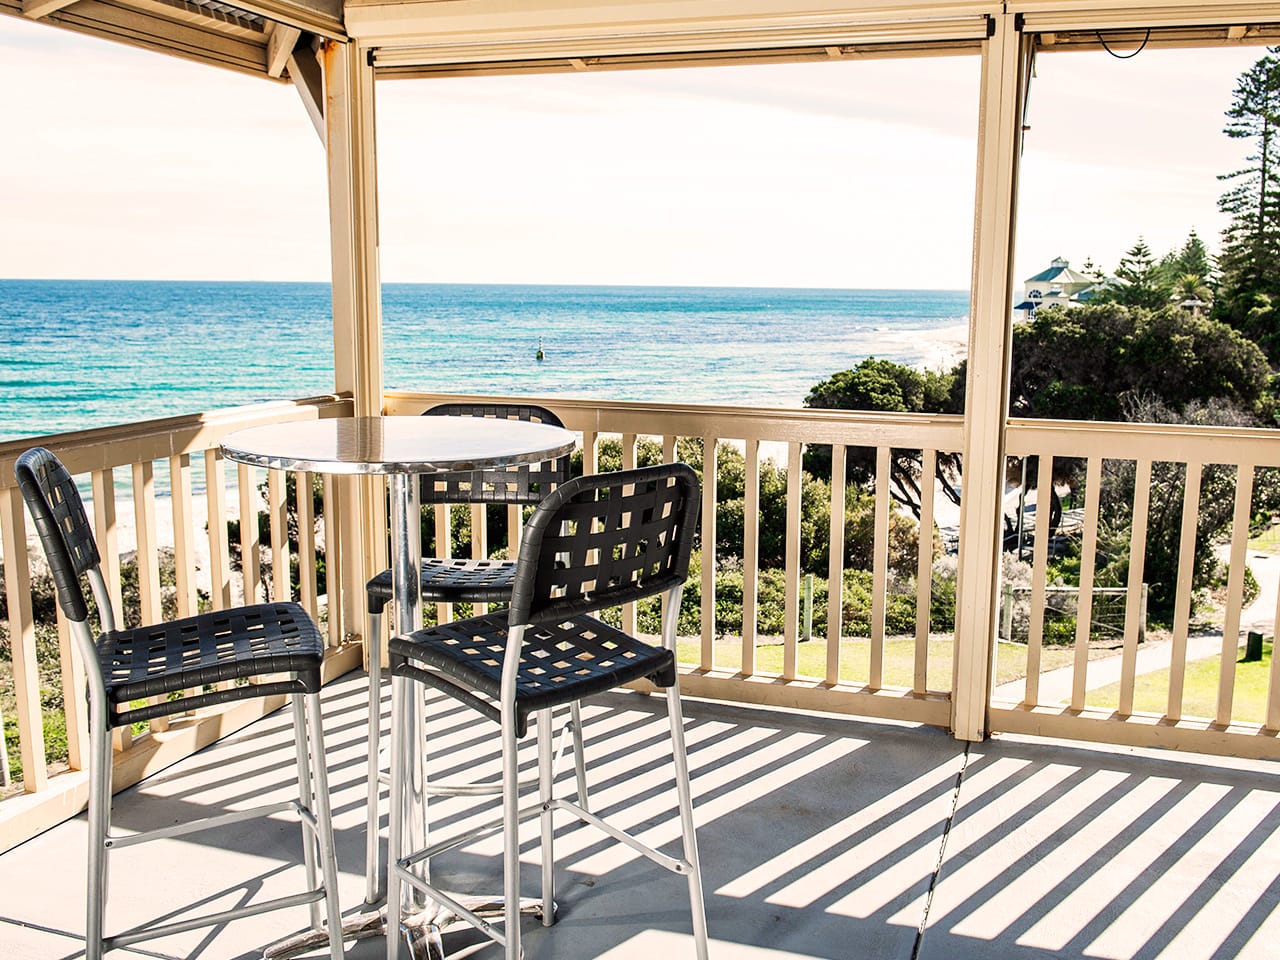 Function Room's Terrace With Ocean View, Few Chairs And A Table